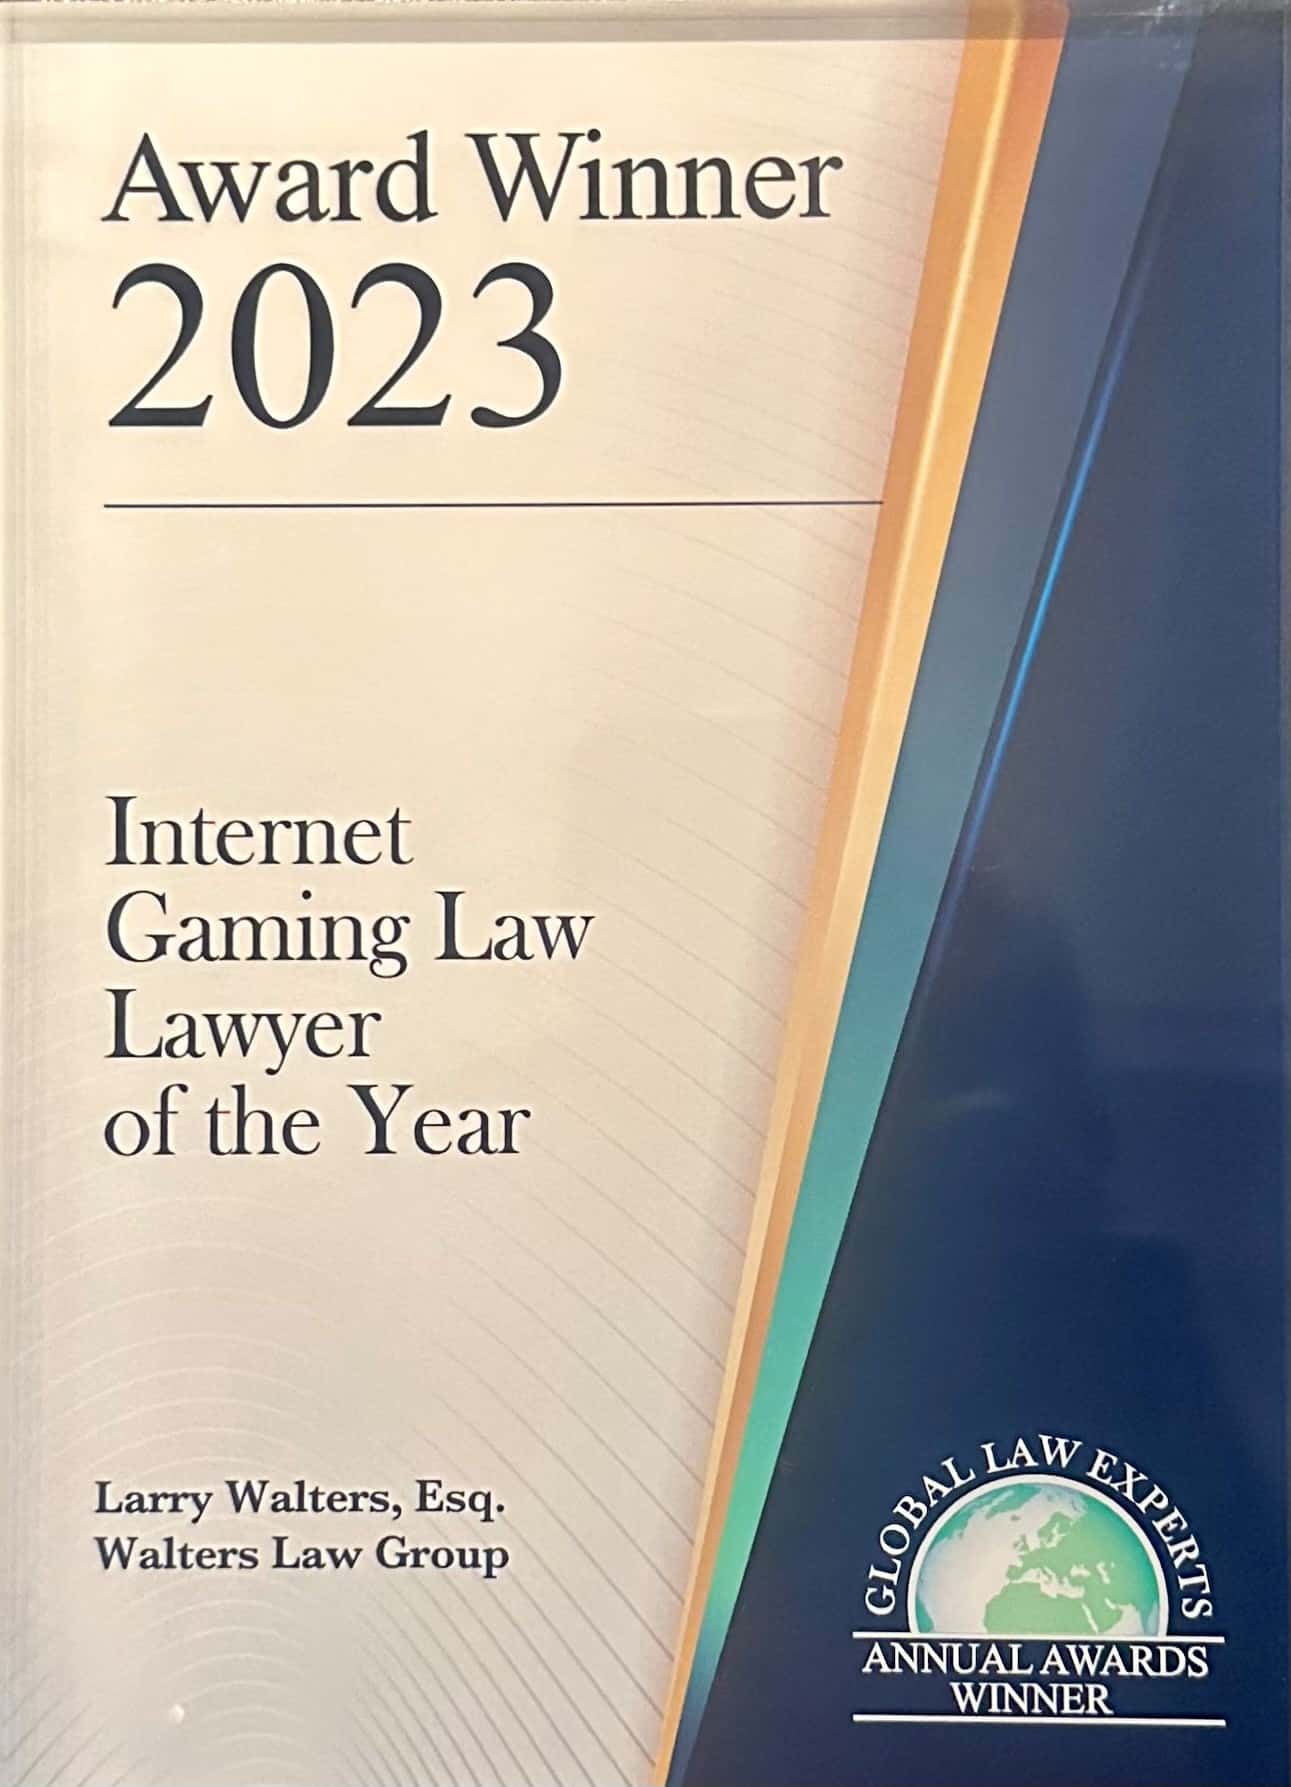 Global Law Experts 2021